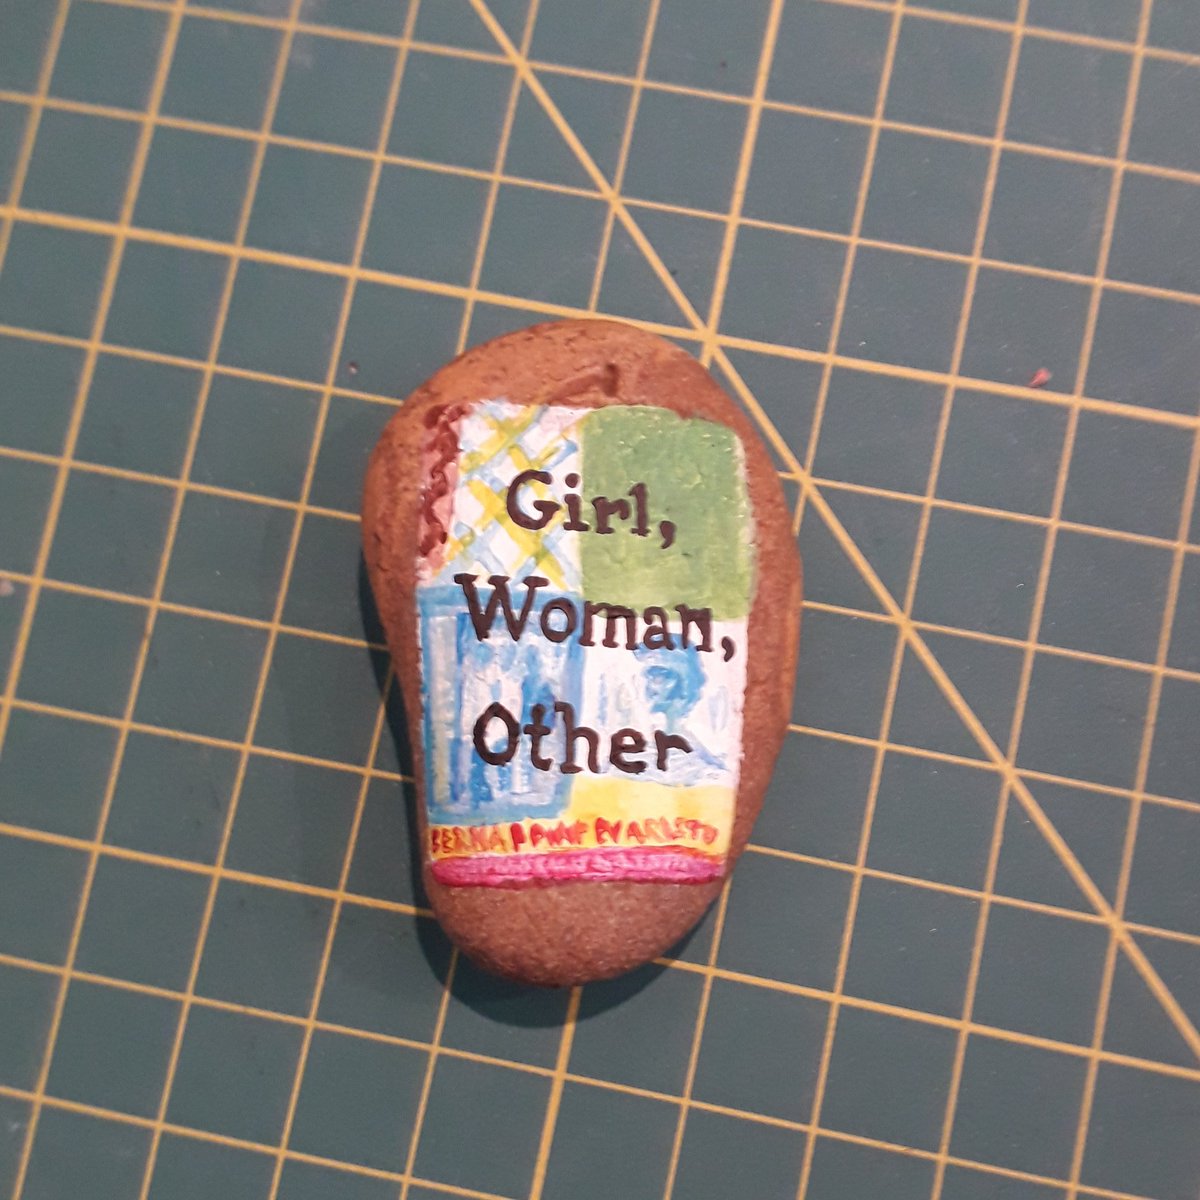 Girl, Woman, Other by  @BernardineEvari painted on a pebble, such a brilliant book